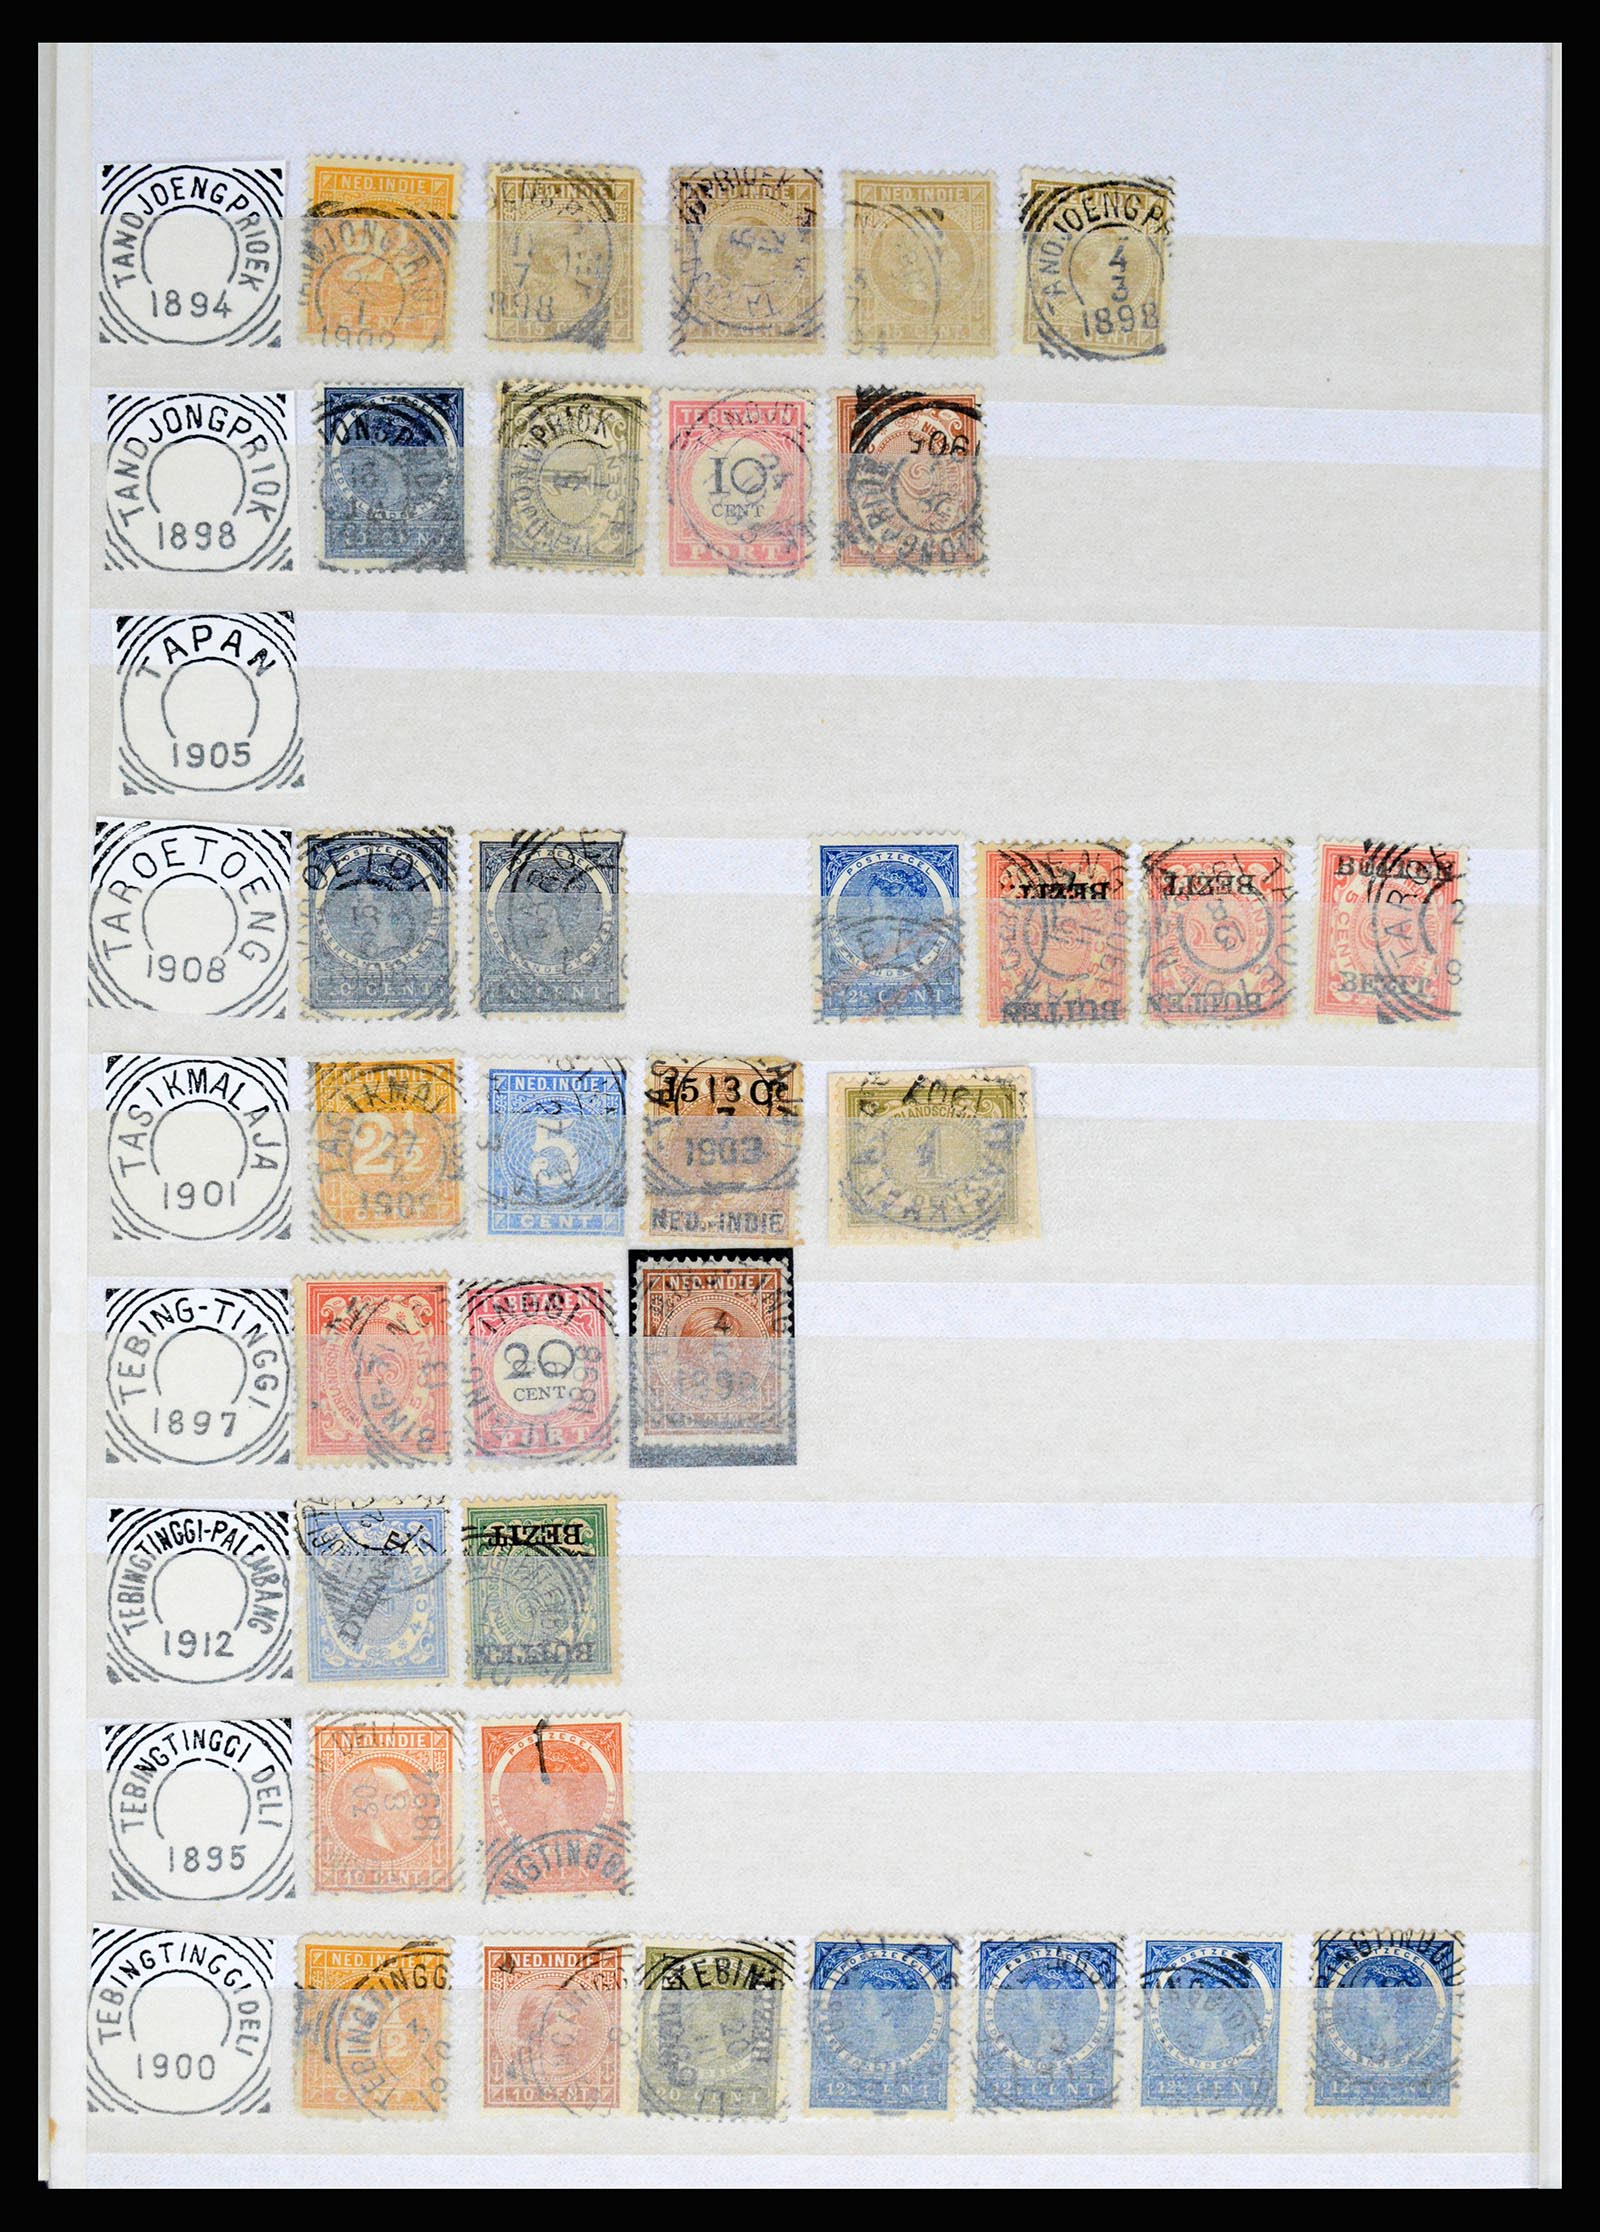 36839 095 - Stamp collection 36839 Dutch east Indies square cancels.